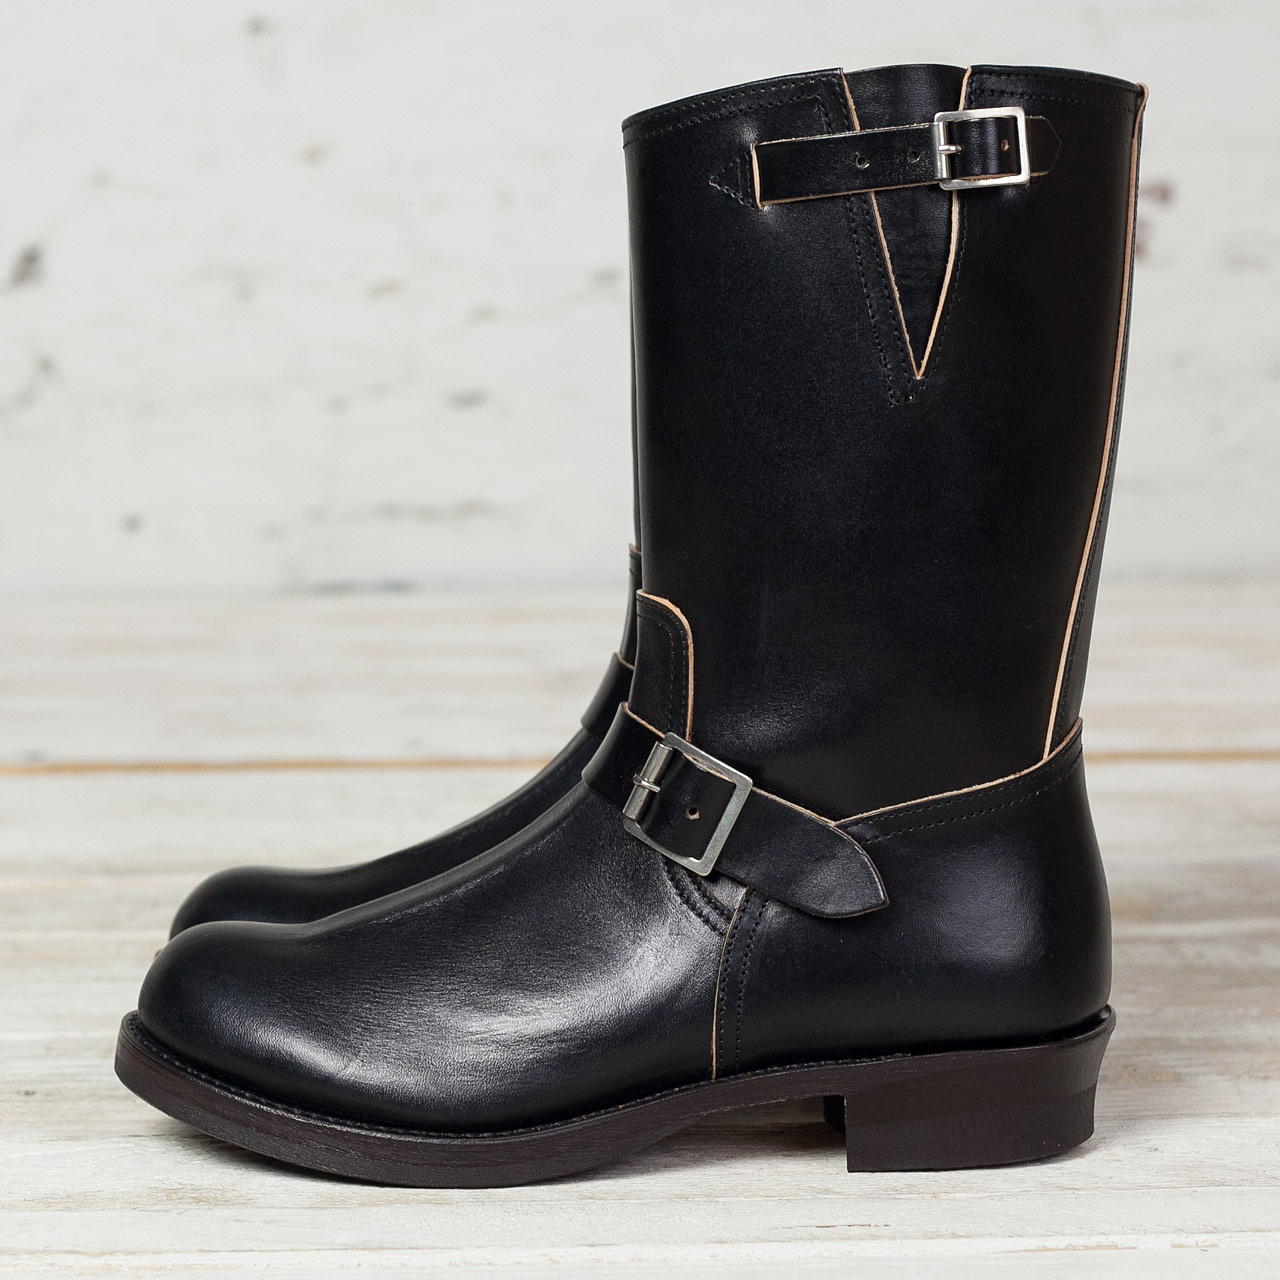 THE REAL McCOY'S Buco Engineer Boots / Buttock Black | Burg & Schild